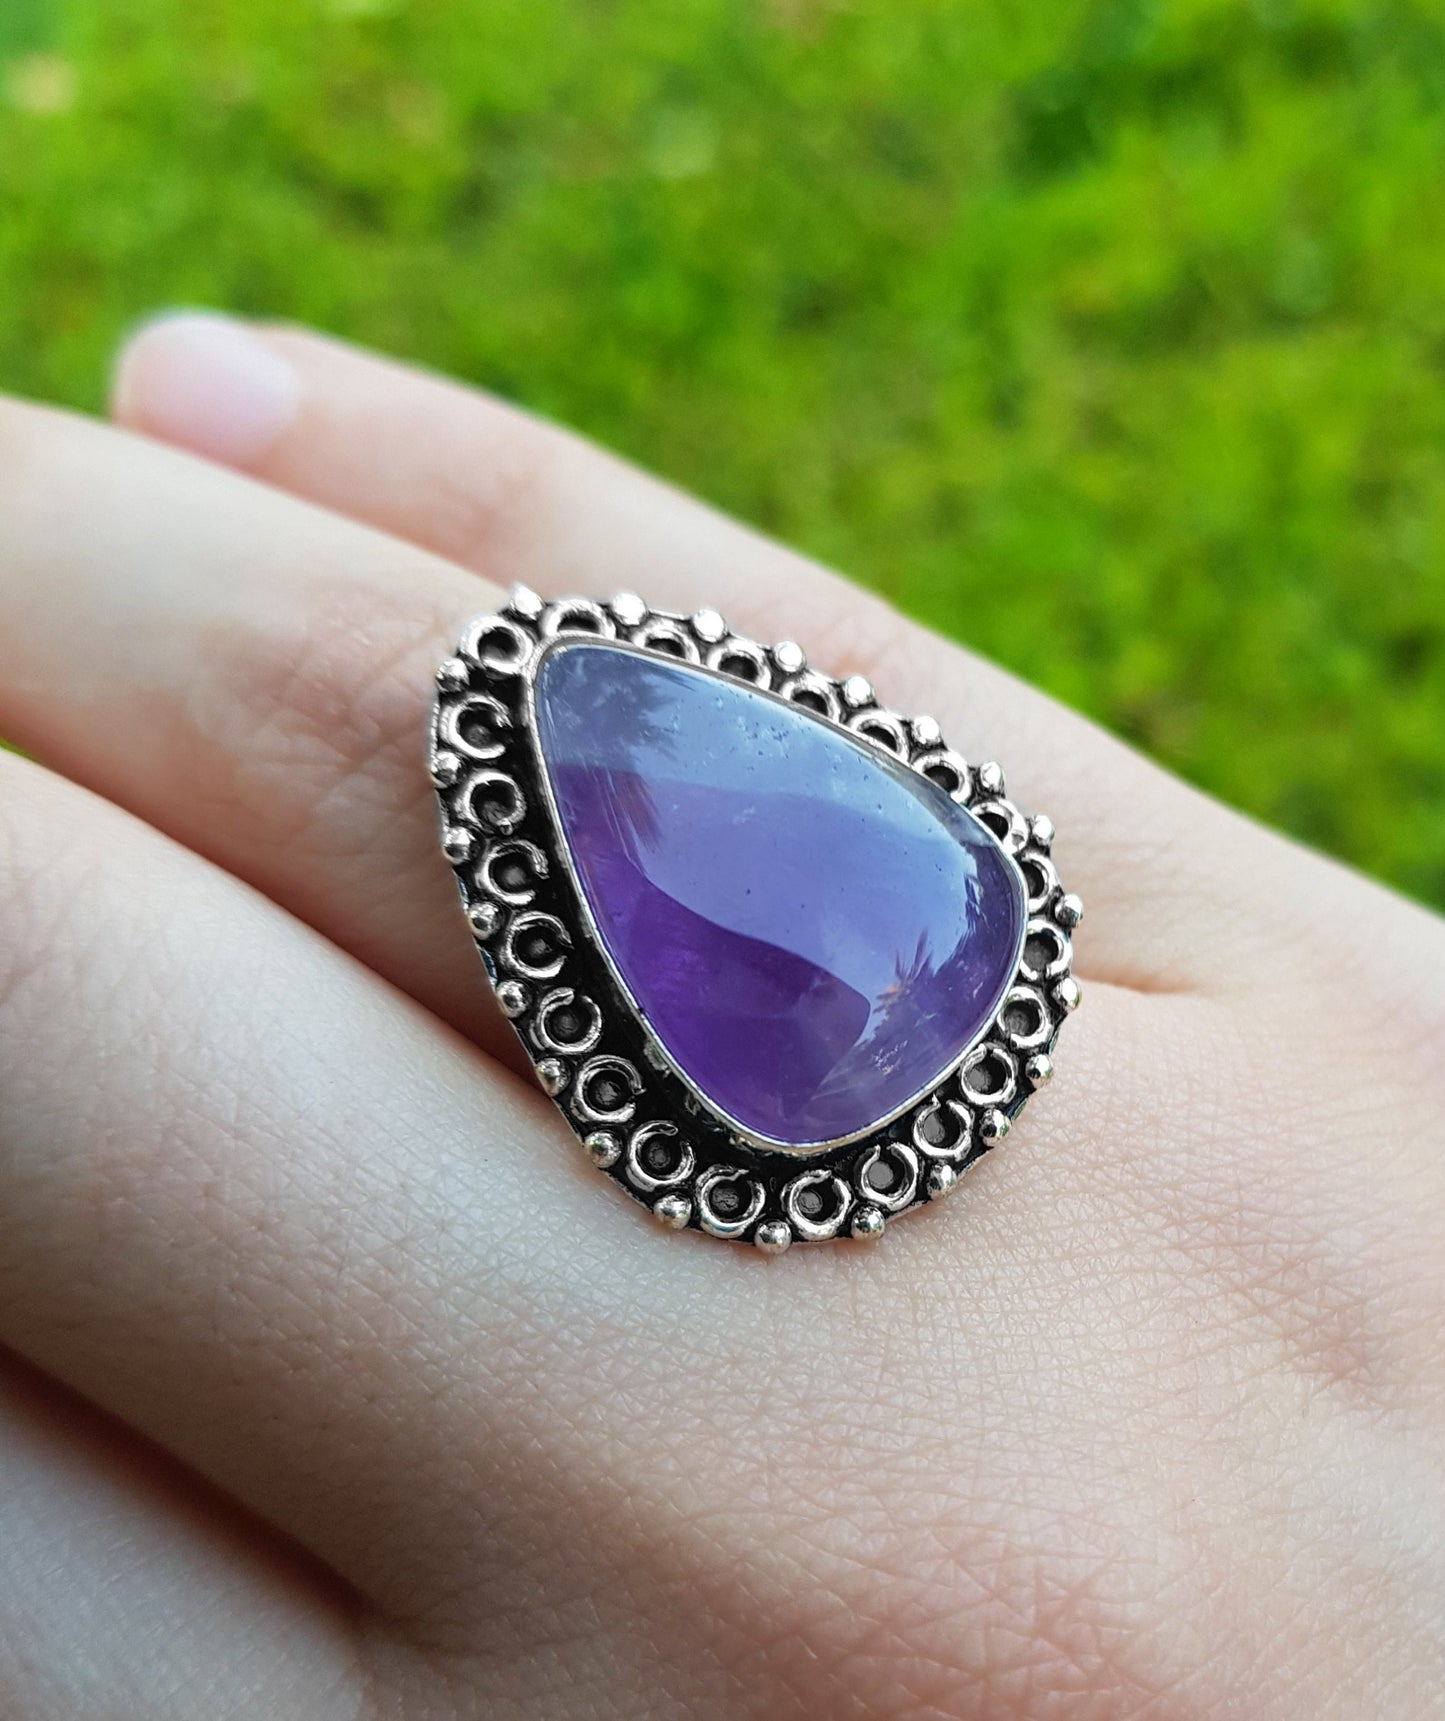 Amethyst Gemstone Ring Big Statement Ring In Sterling Silver Boho Ring Size US 8 3/4 One Of A Kind Gift Unique Jewellery